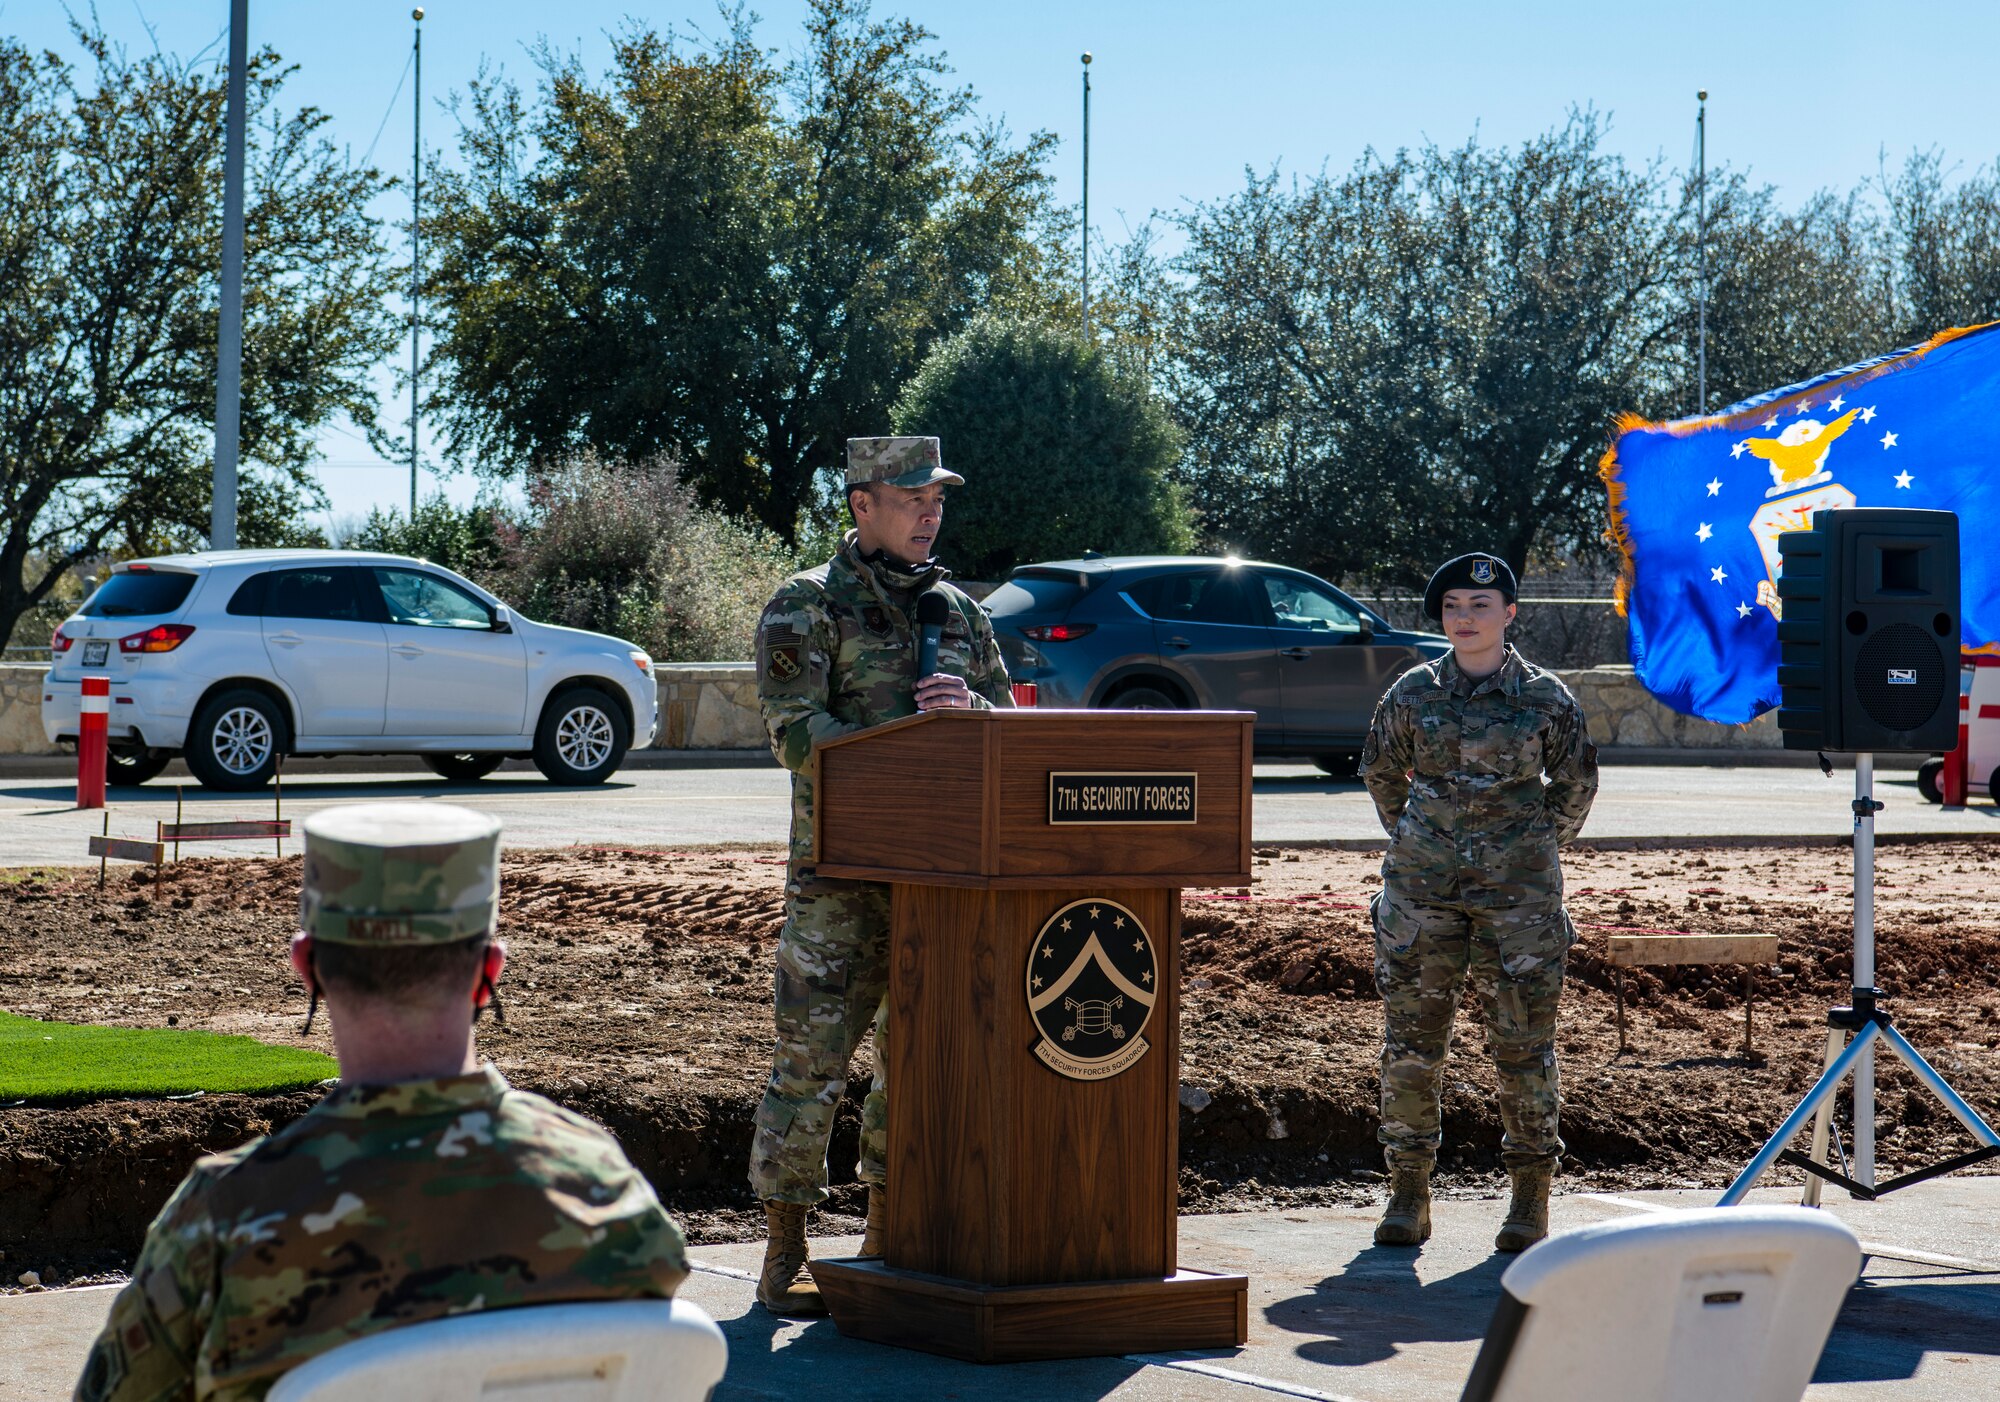 Col. Ed Sumangil, 7th Bomb Wing commander, speaks during the Visitor Control Center’s groundbreaking ceremony at Dyess Air Force Base, Texas, Jan. 25, 2021.